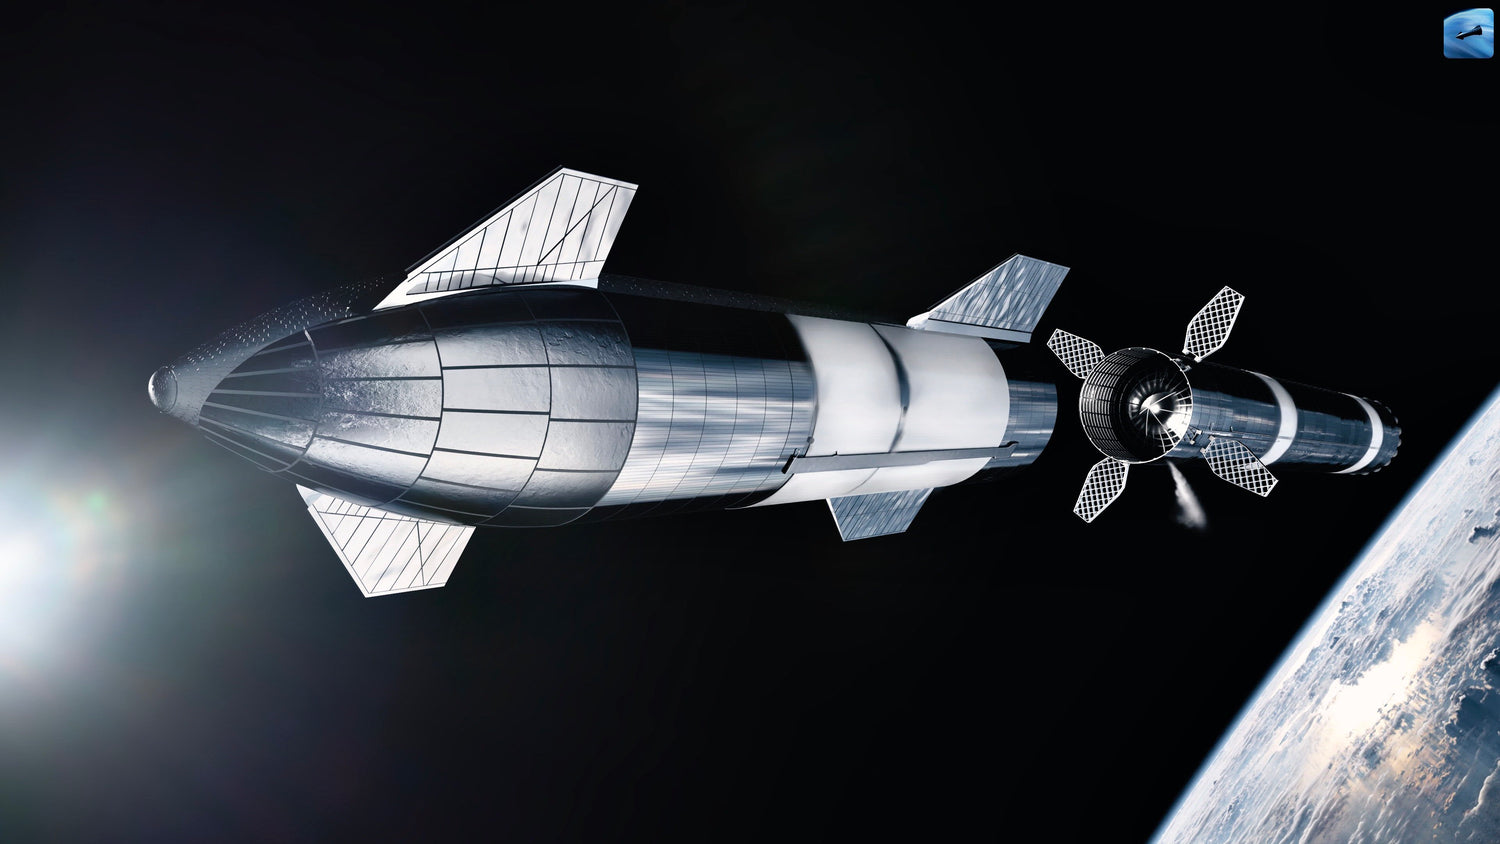 SpaceX Is Already Building The First Starship Test Vehicle That Will Launch To Orbit